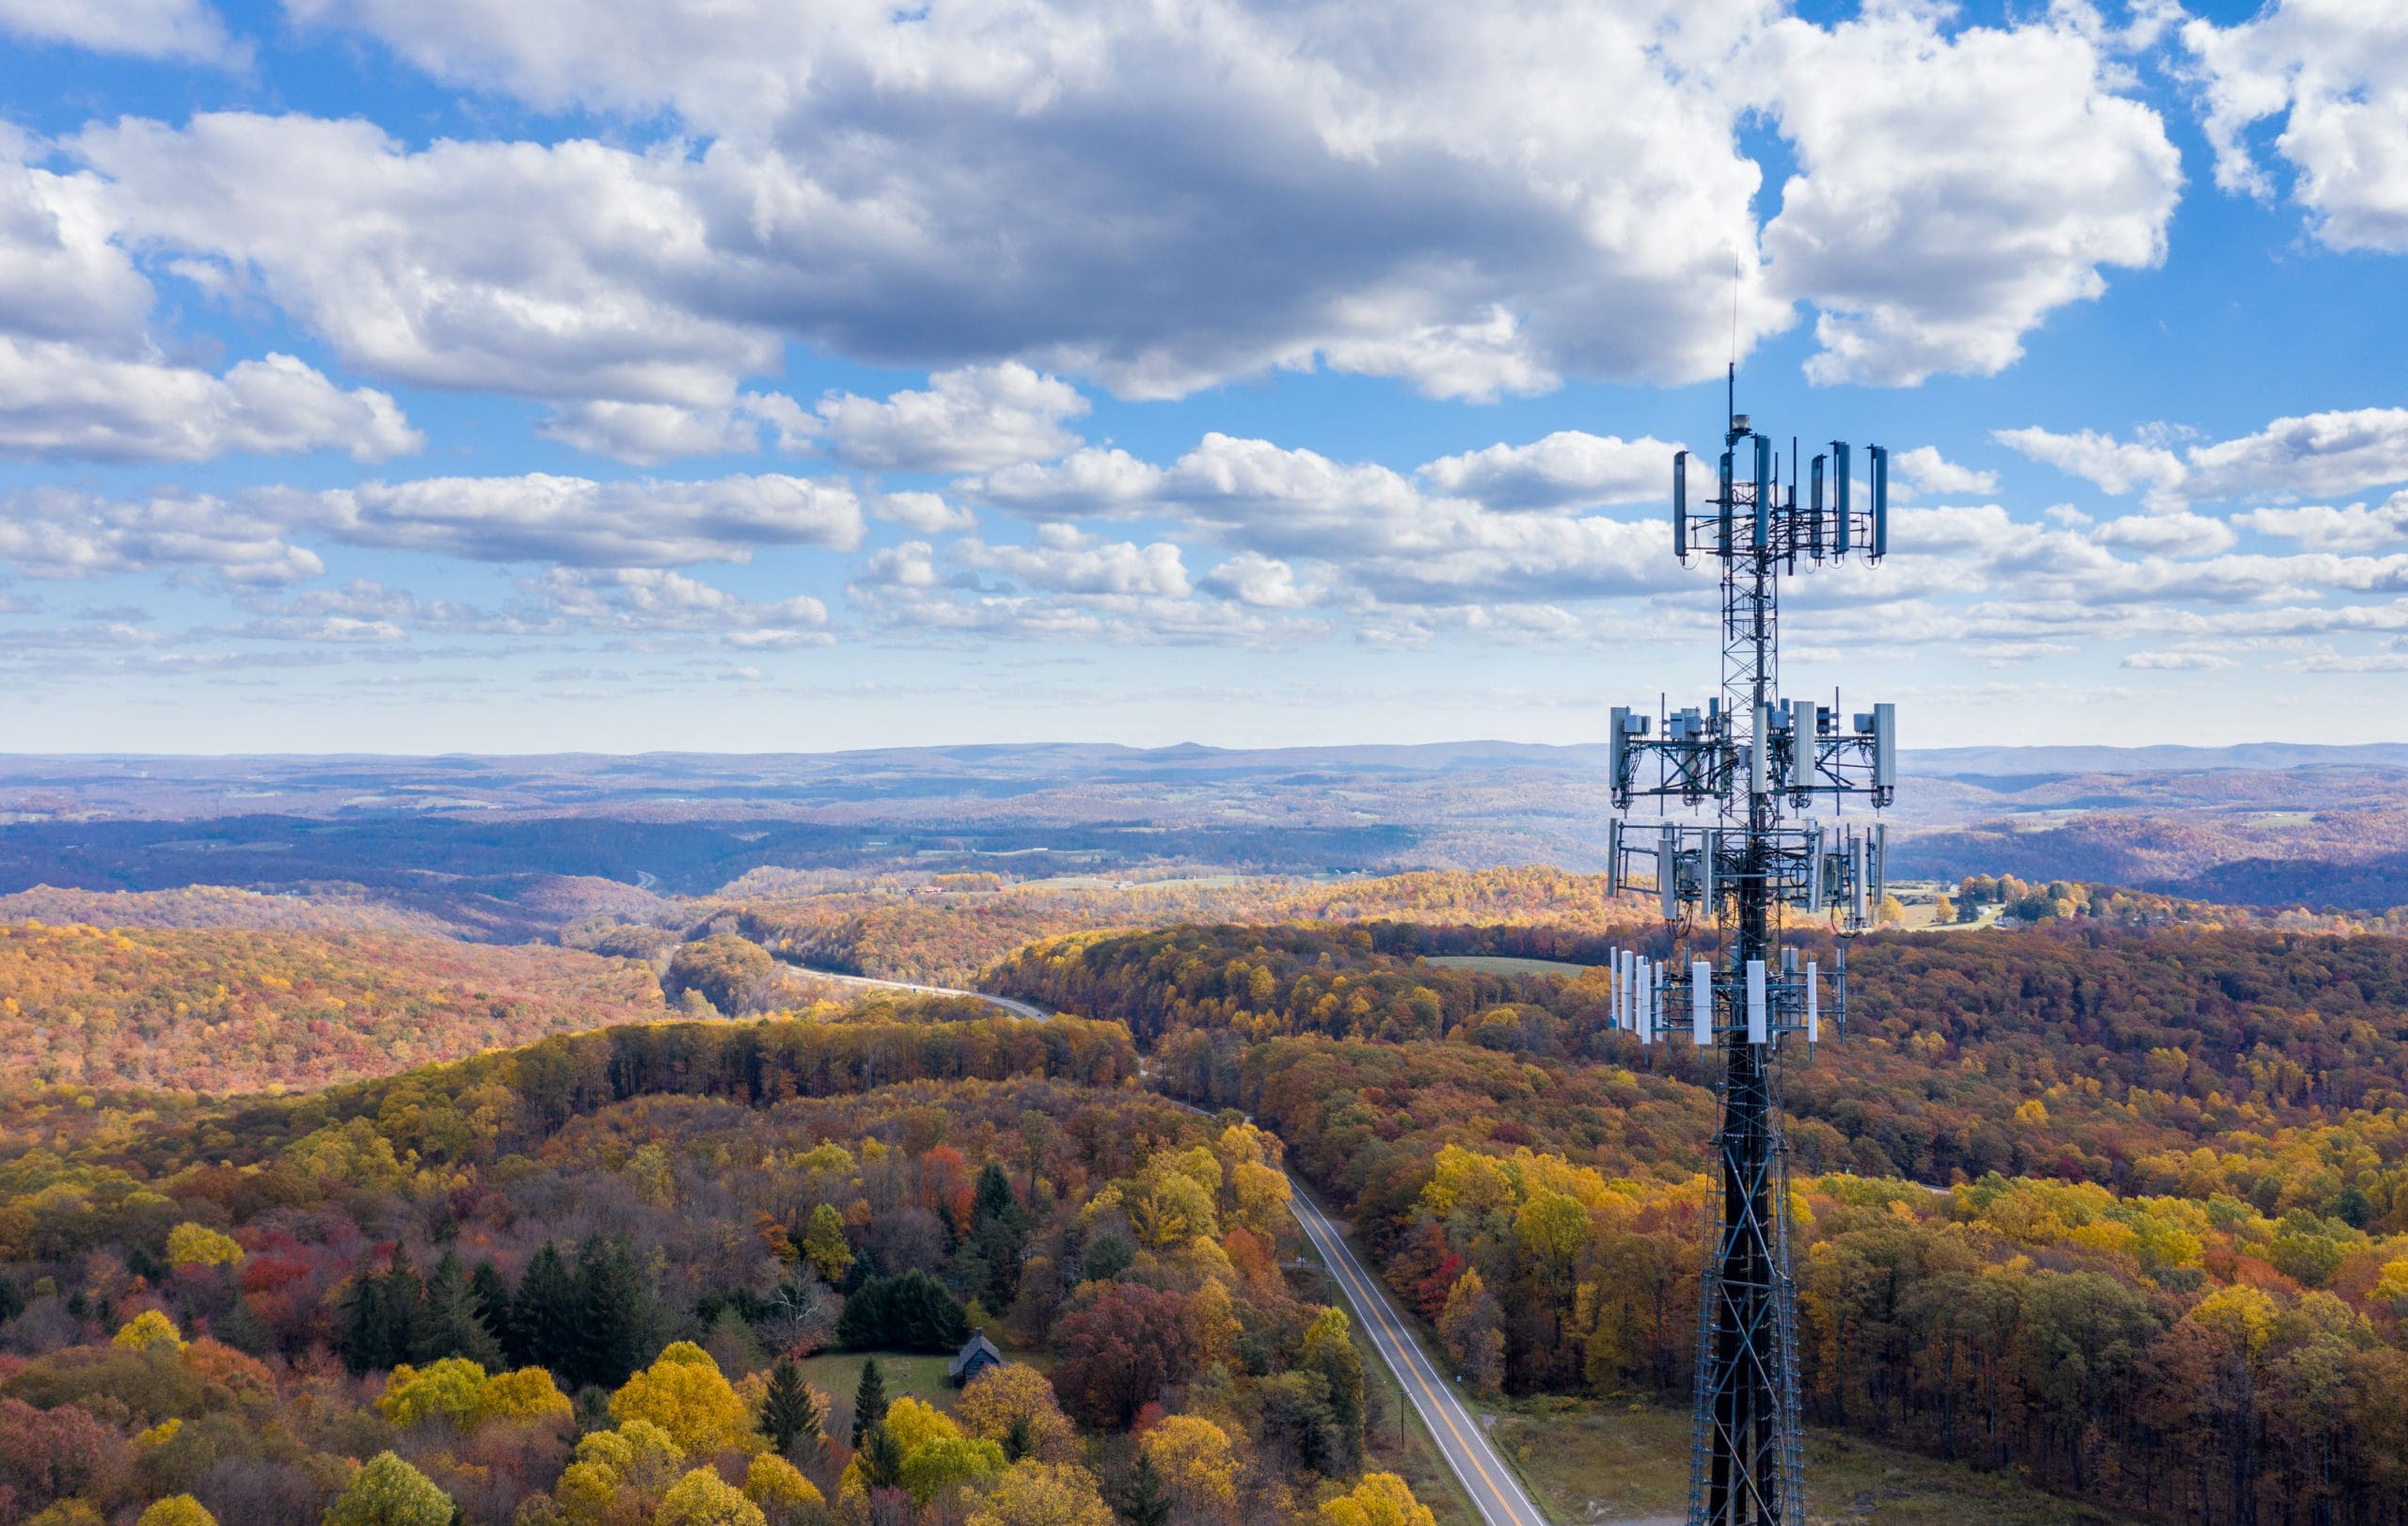 Aerial view of mobile phone cell tower over forested rural area of West Virginia to illustrate lack of broadband internet service